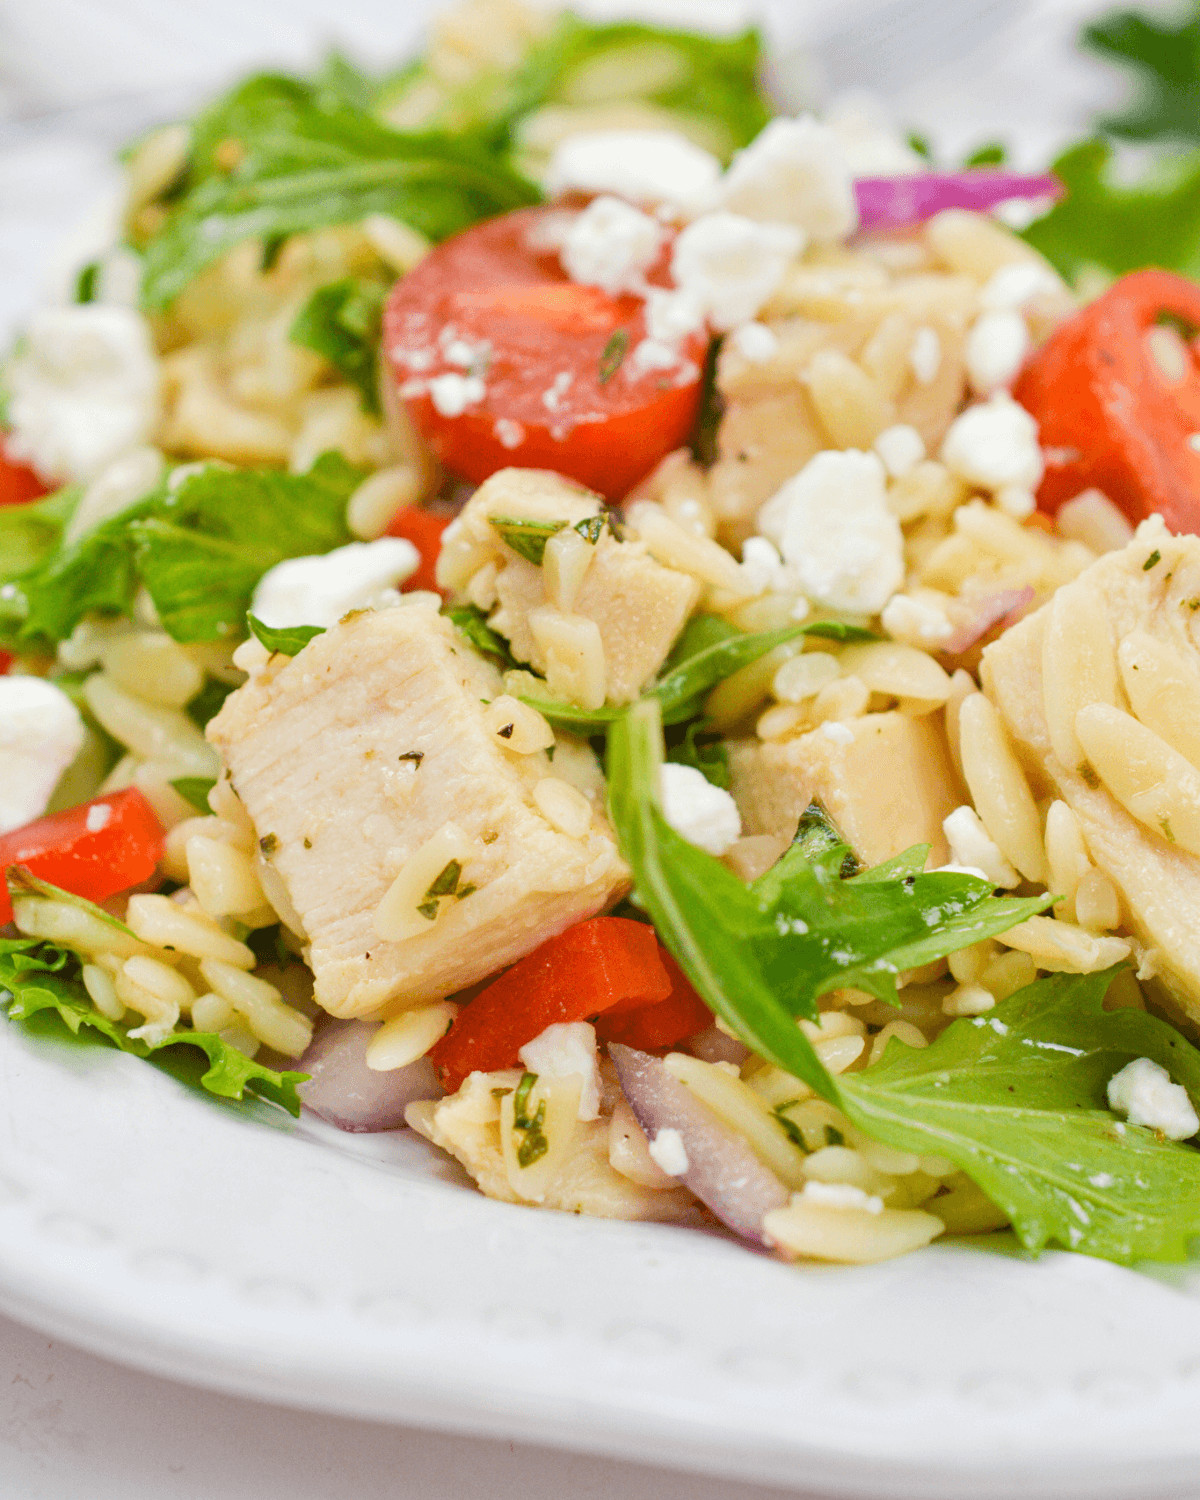 A close up on the orzo chicken salad with tender greens.